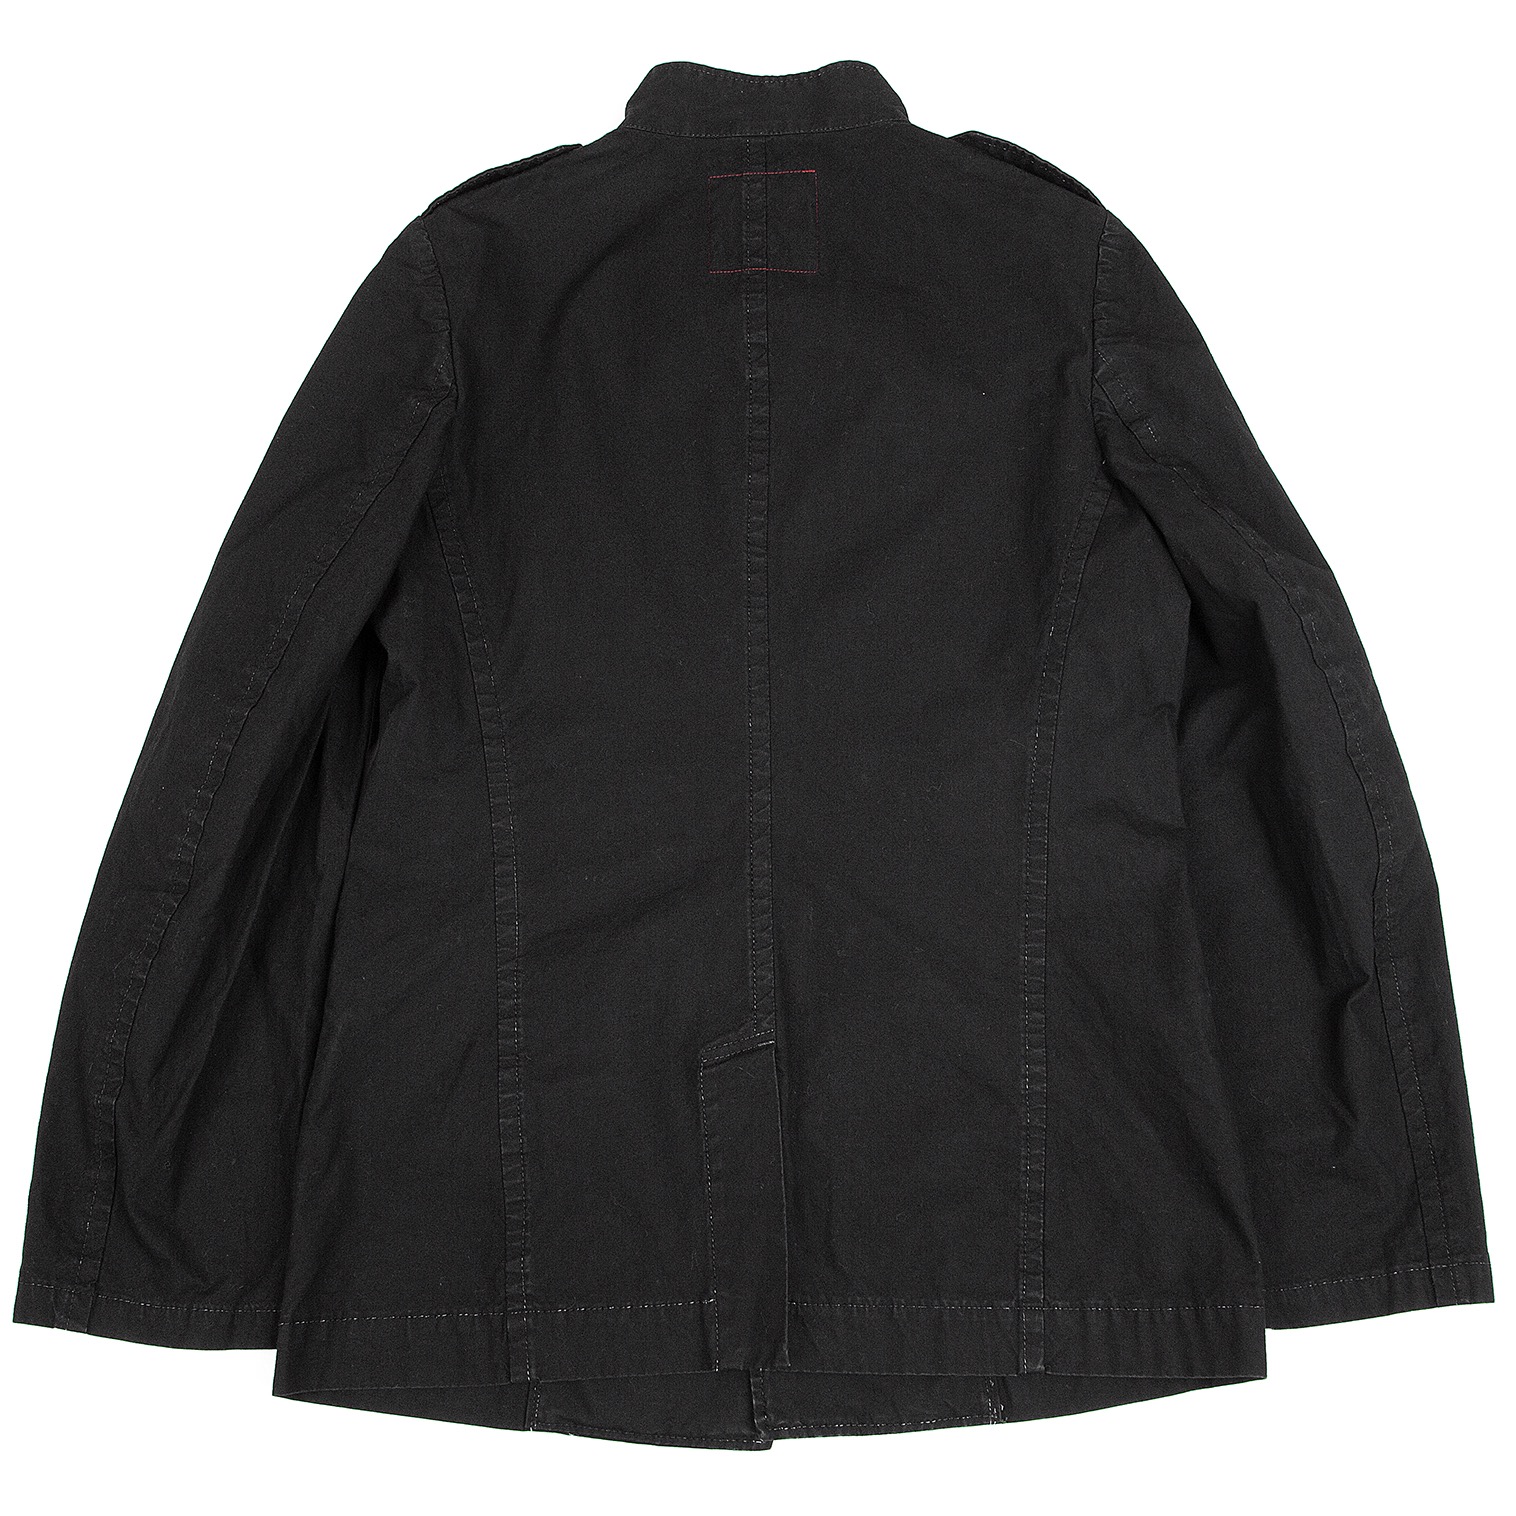 Y's Red Label Staand Collar Military Jacket Black 2 | PLAYFUL